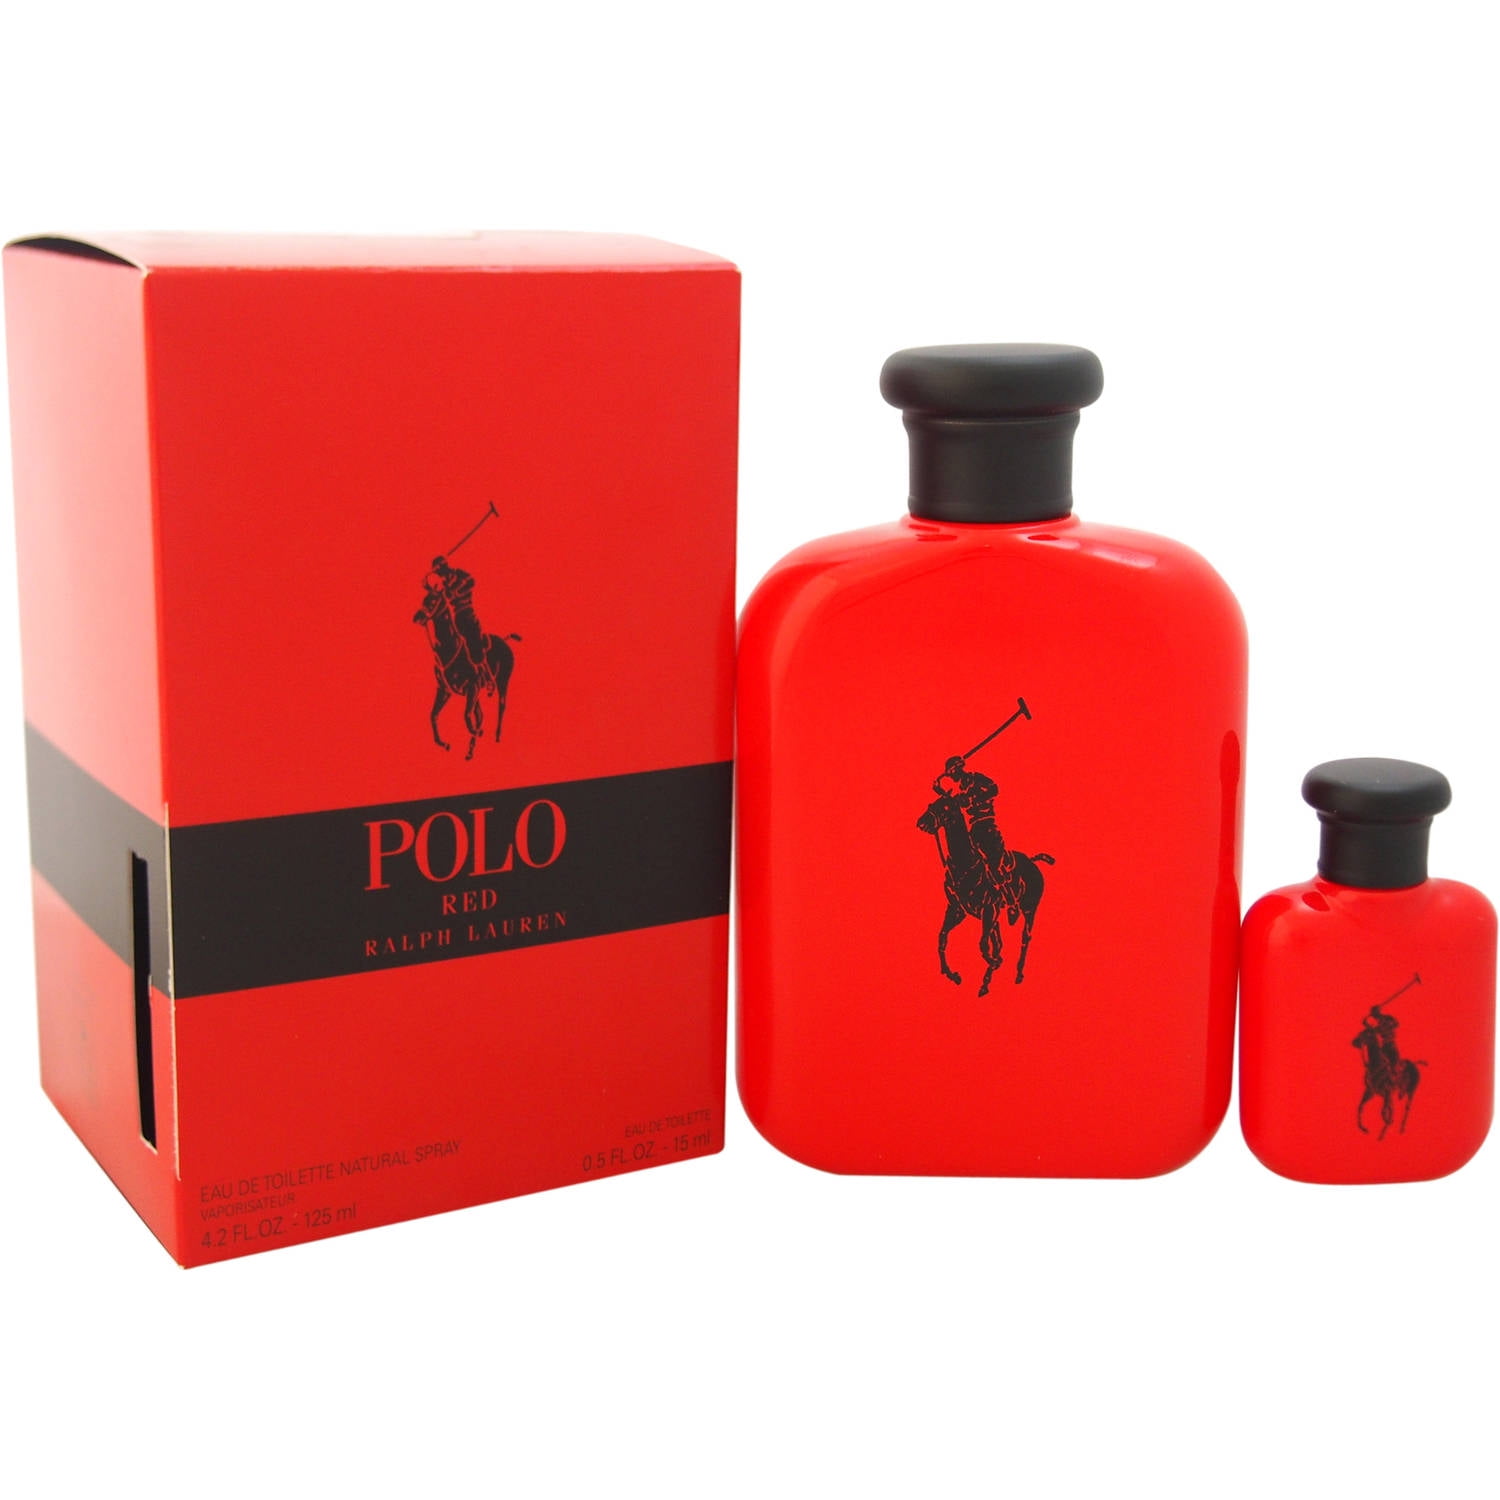 Ralph Lauren Polo Red Cologne Gift Set 